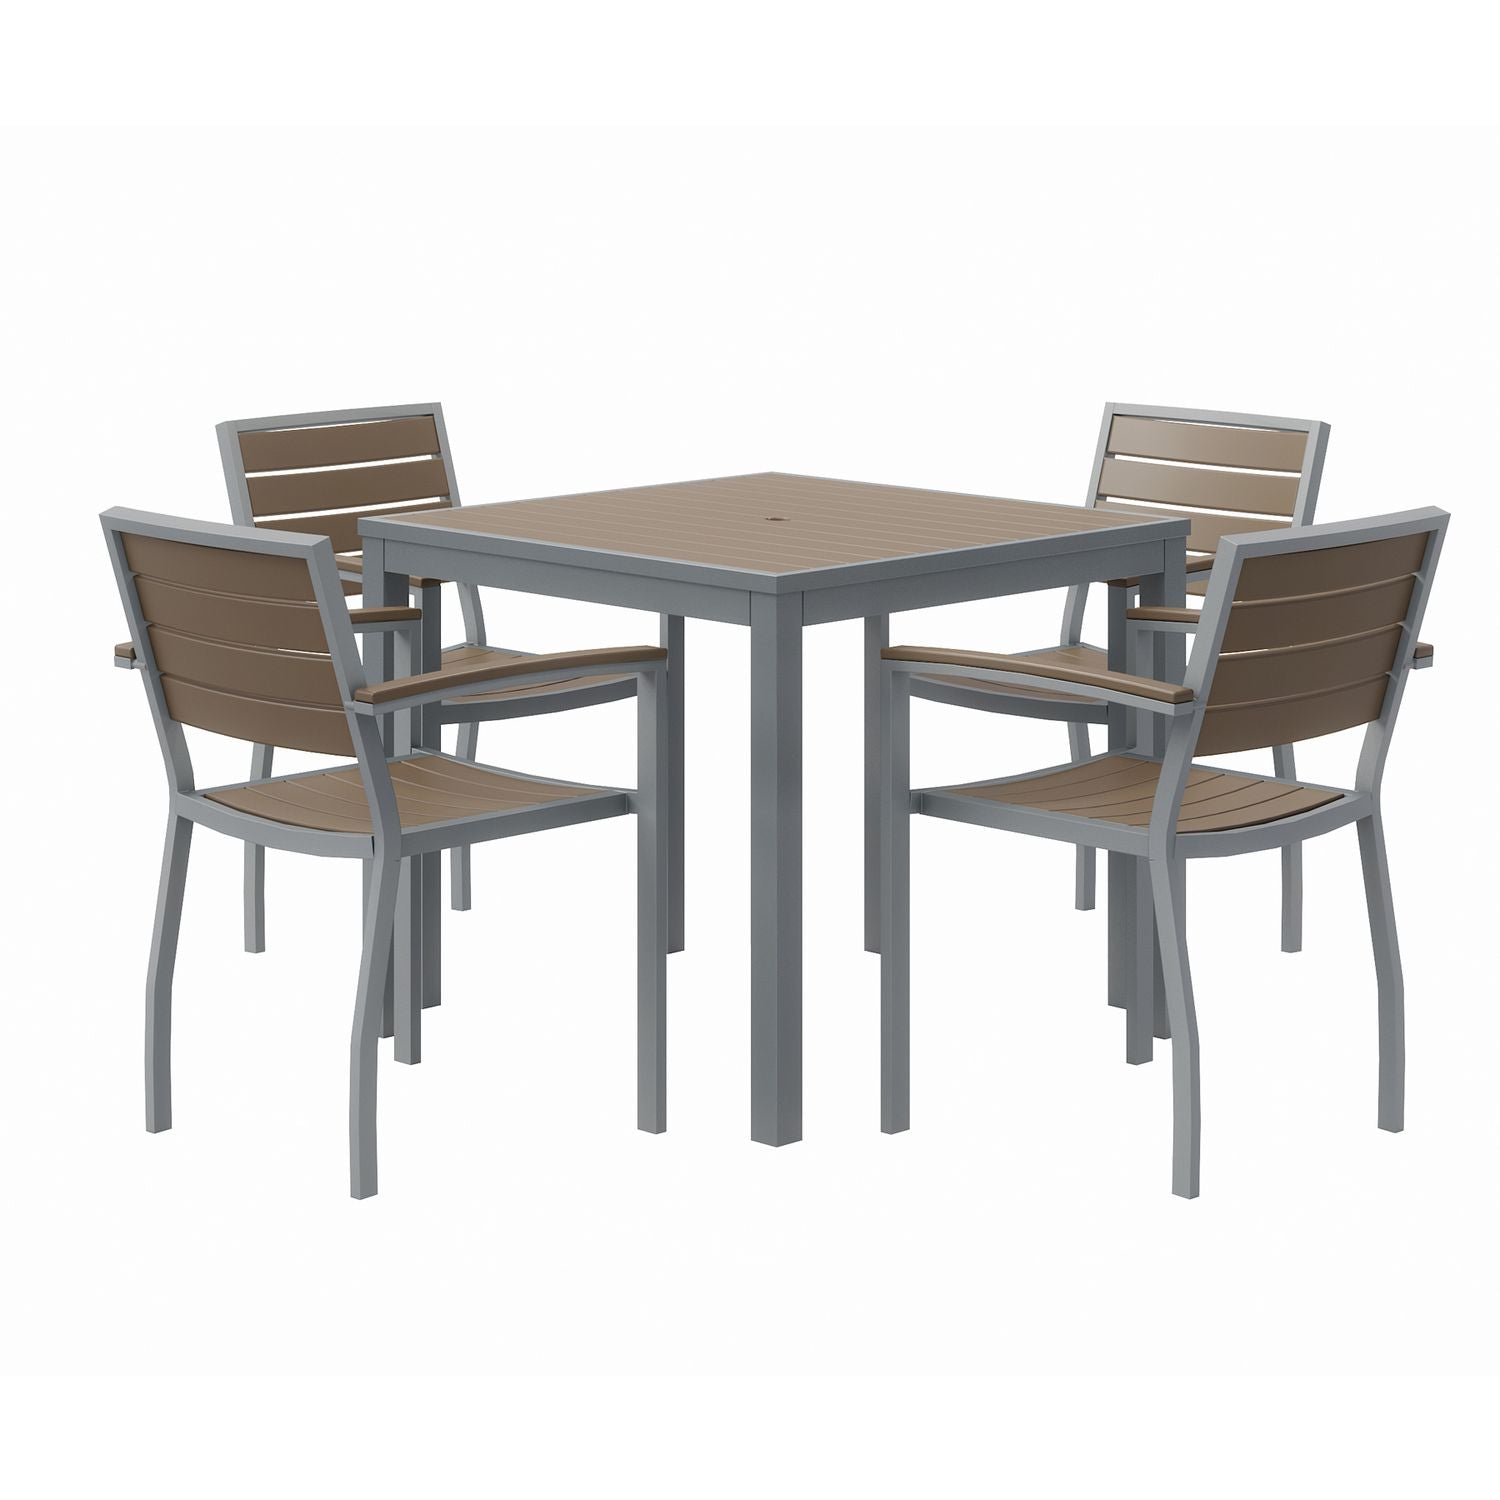 eveleen-outdoor-patio-table-with-four-mocha-powder-coated-polymer-chairs-square-32-mocha-ships-in-4-6-business-days_kfi840031918543 - 1